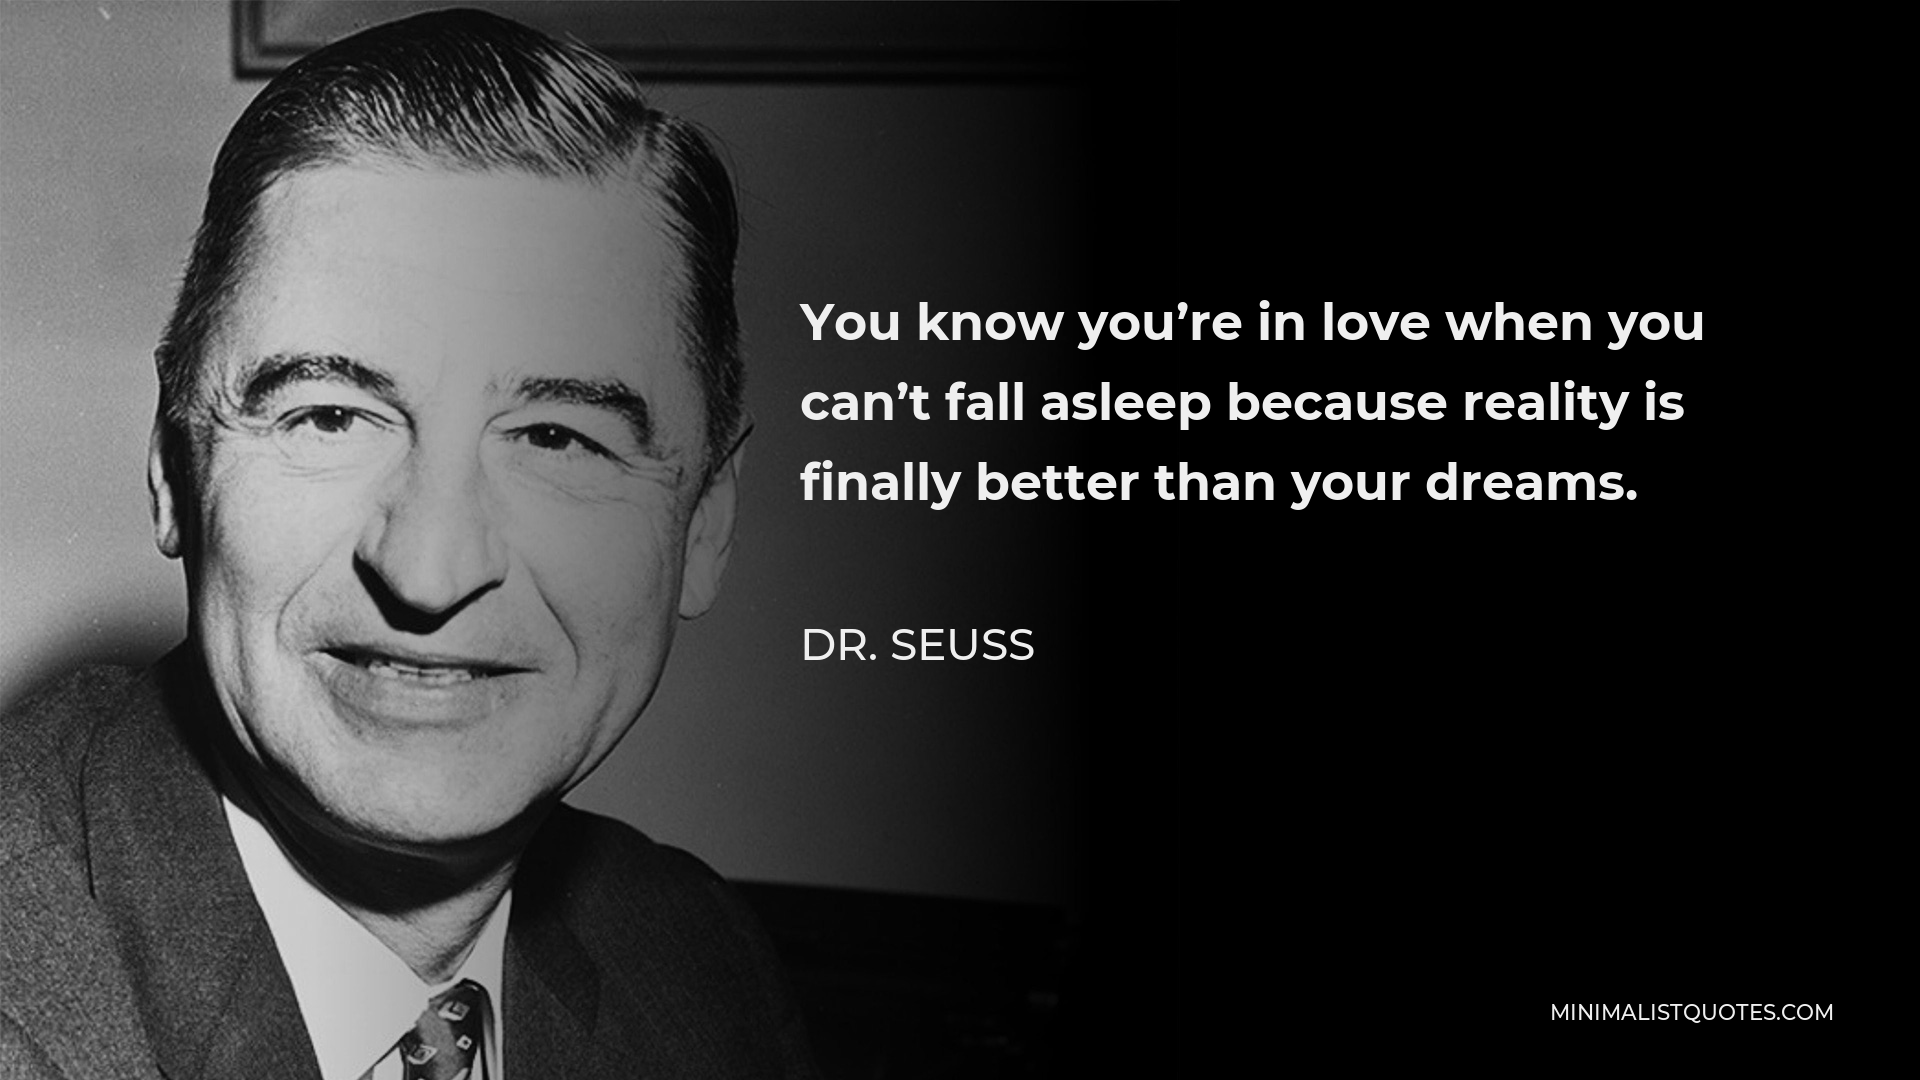 Dr. Seuss Quote - You know you’re in love when you can’t fall asleep because reality is finally better than your dreams.